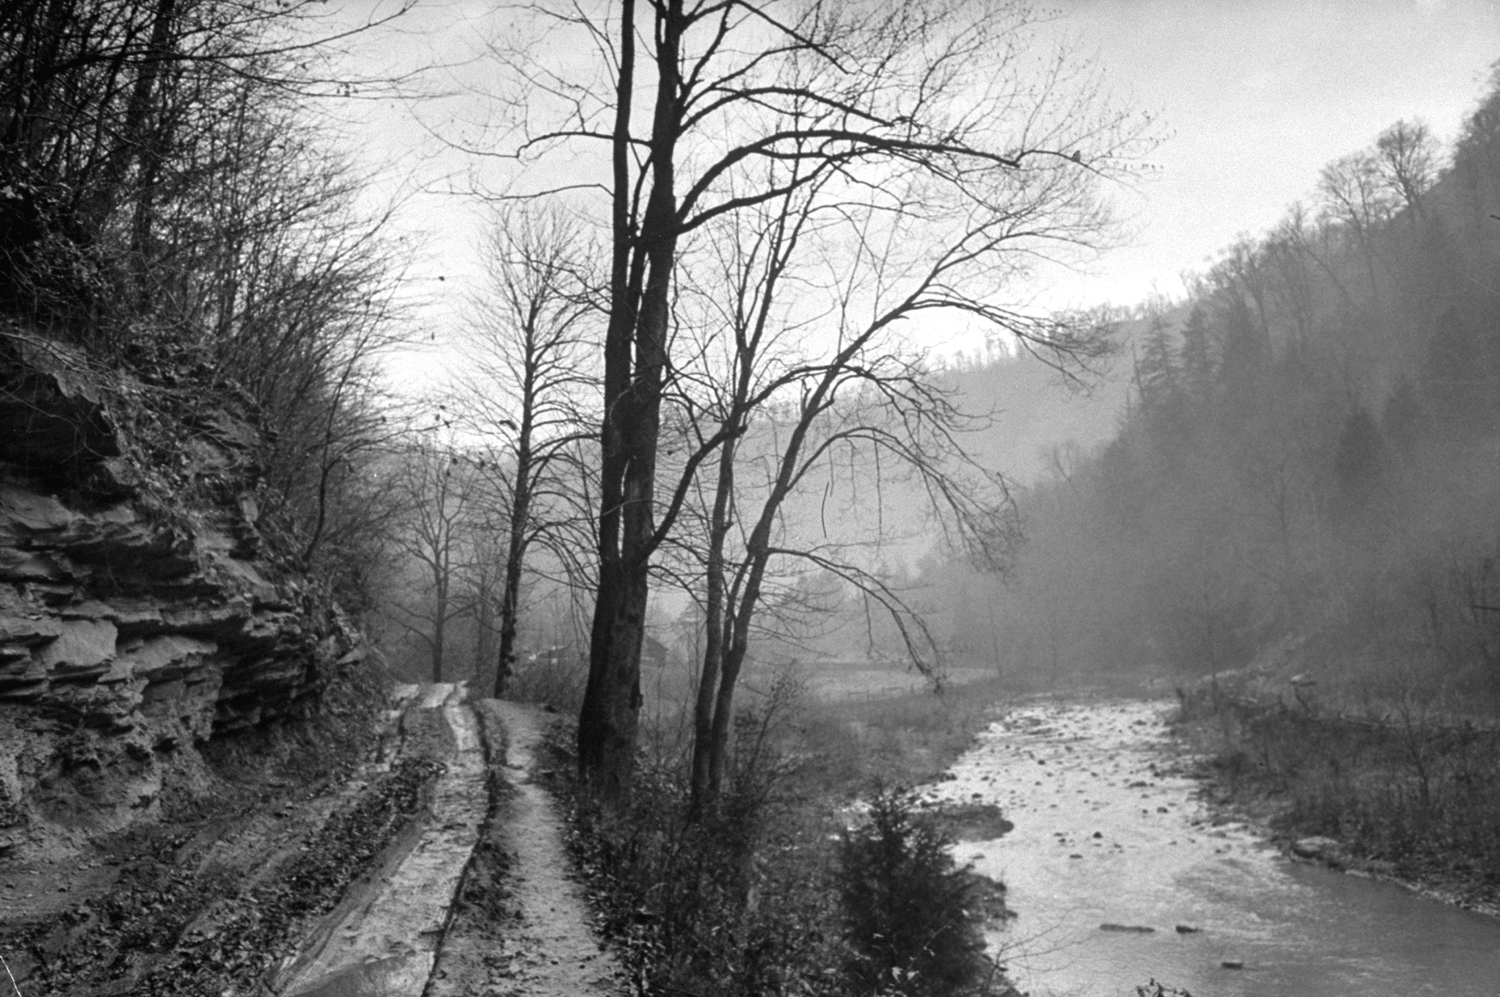 The Cutshin Creek and trail, Leslie County, Ky., 1949.